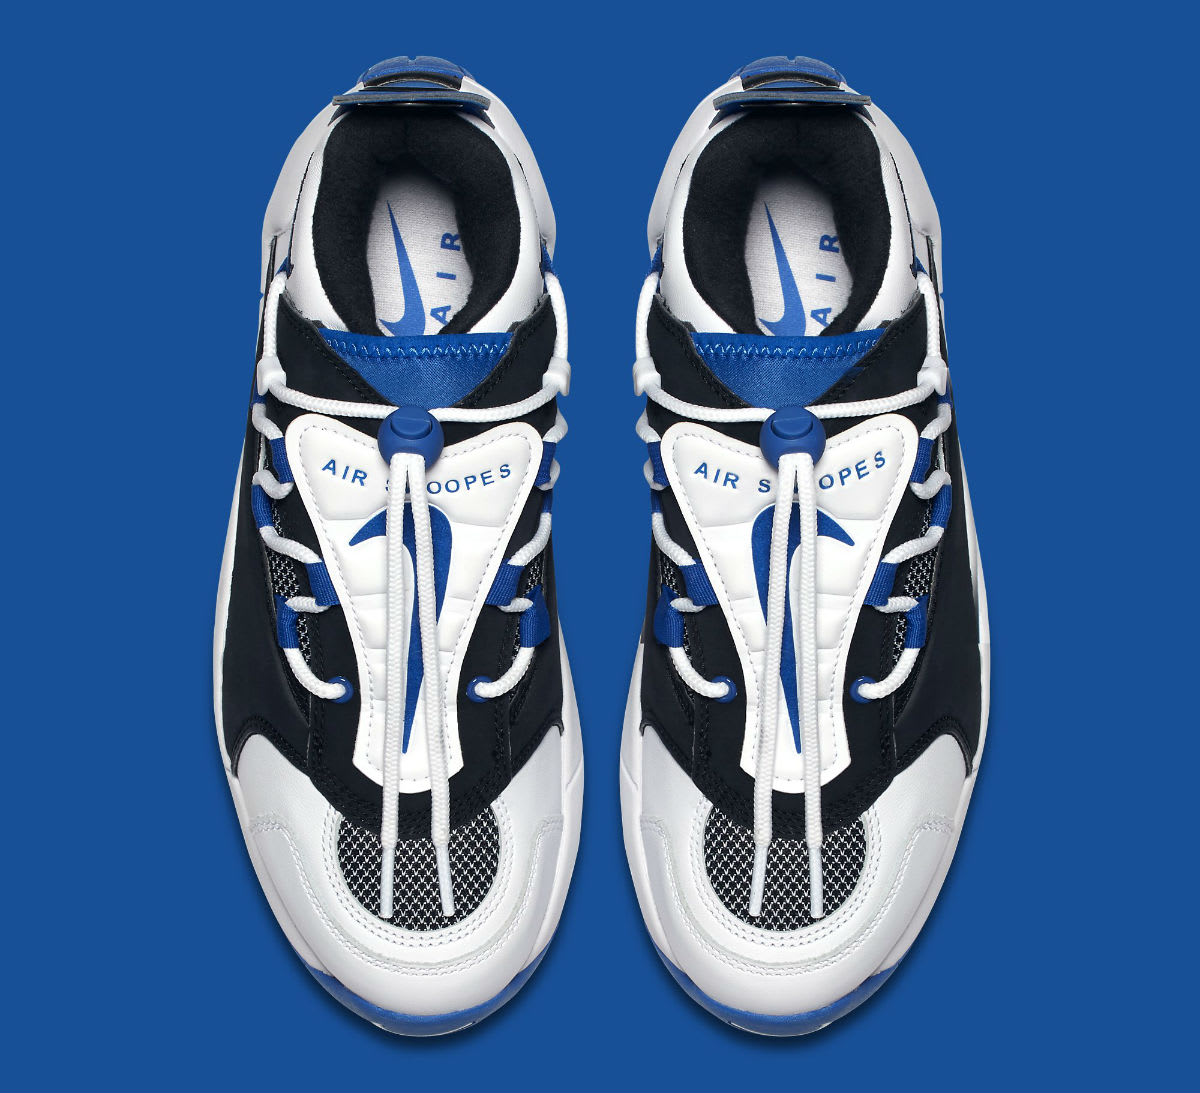 Nike Air Swoopes 2 II White Blue Release Date 917592-101 Top